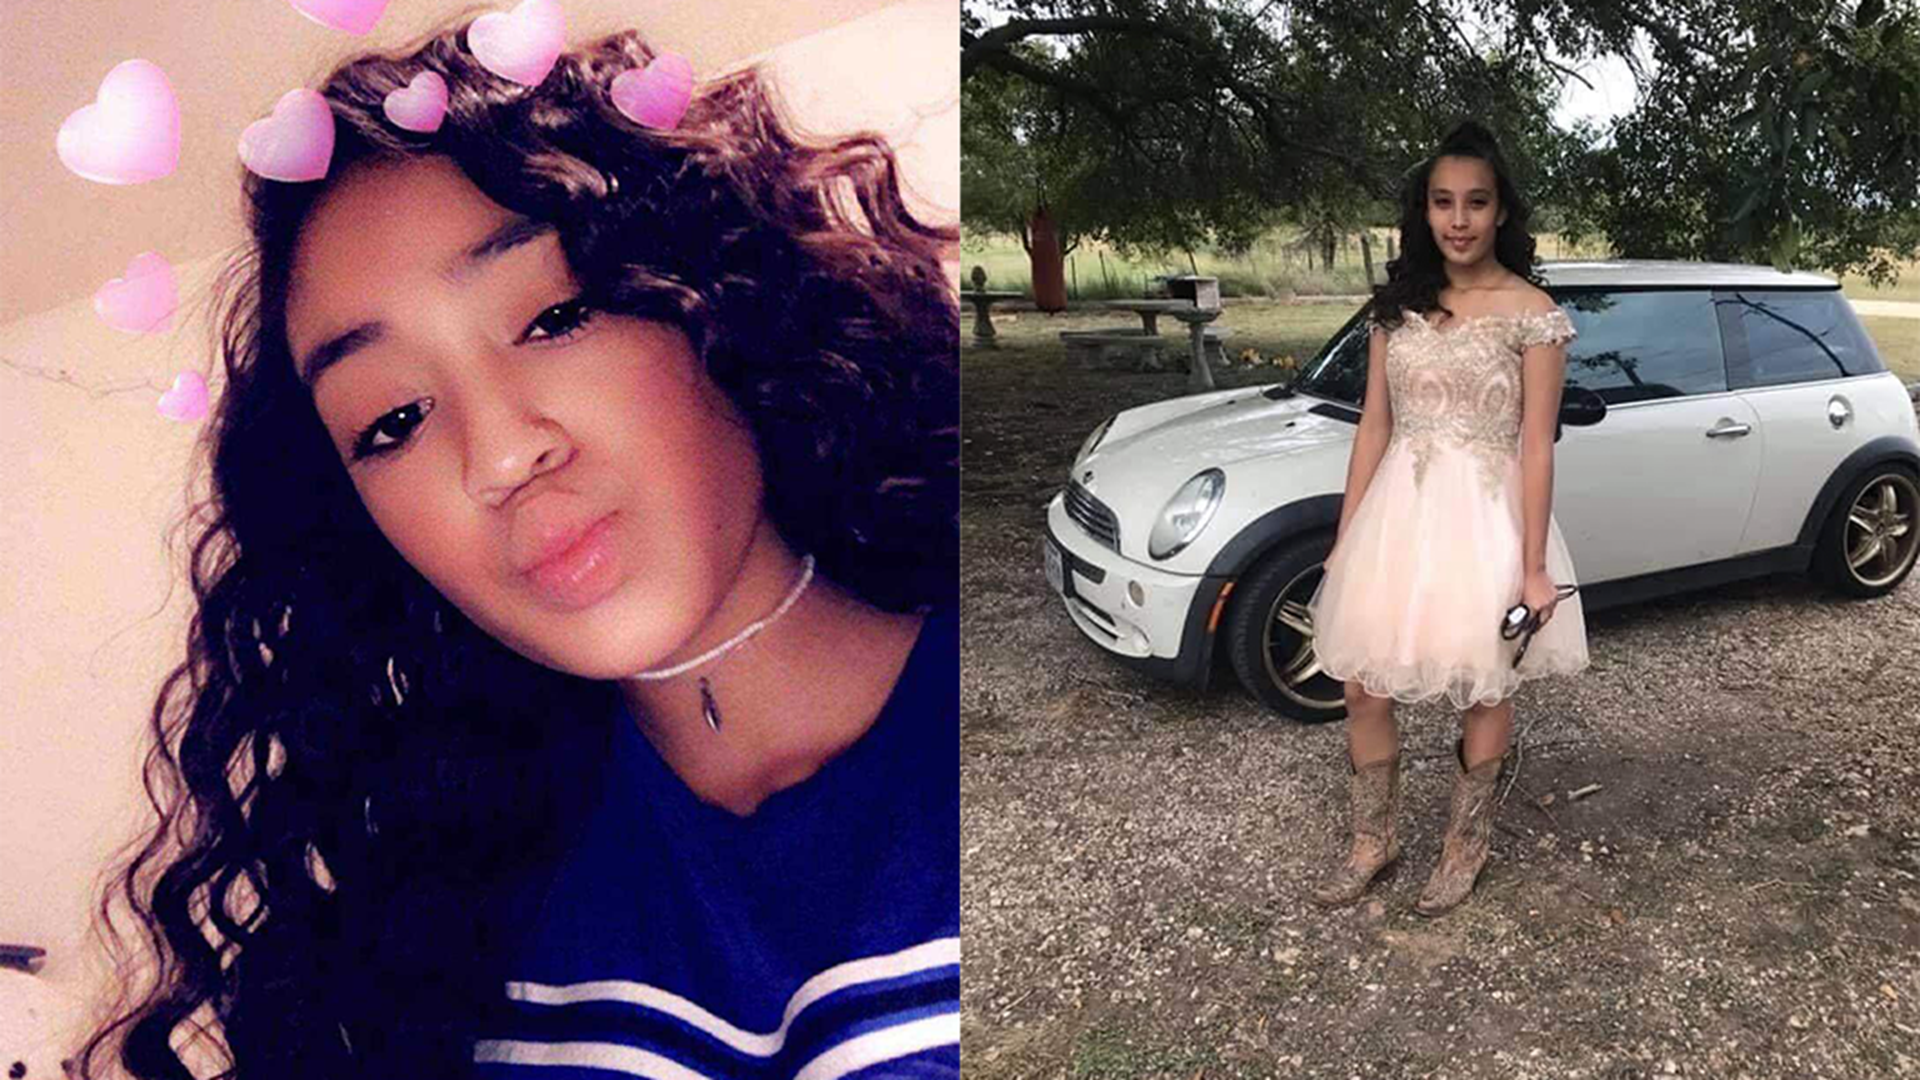 Family and friends in Fredericksburg are mourning the loss of two teenagers. The sophomores died in an apartment fire over the weekend.